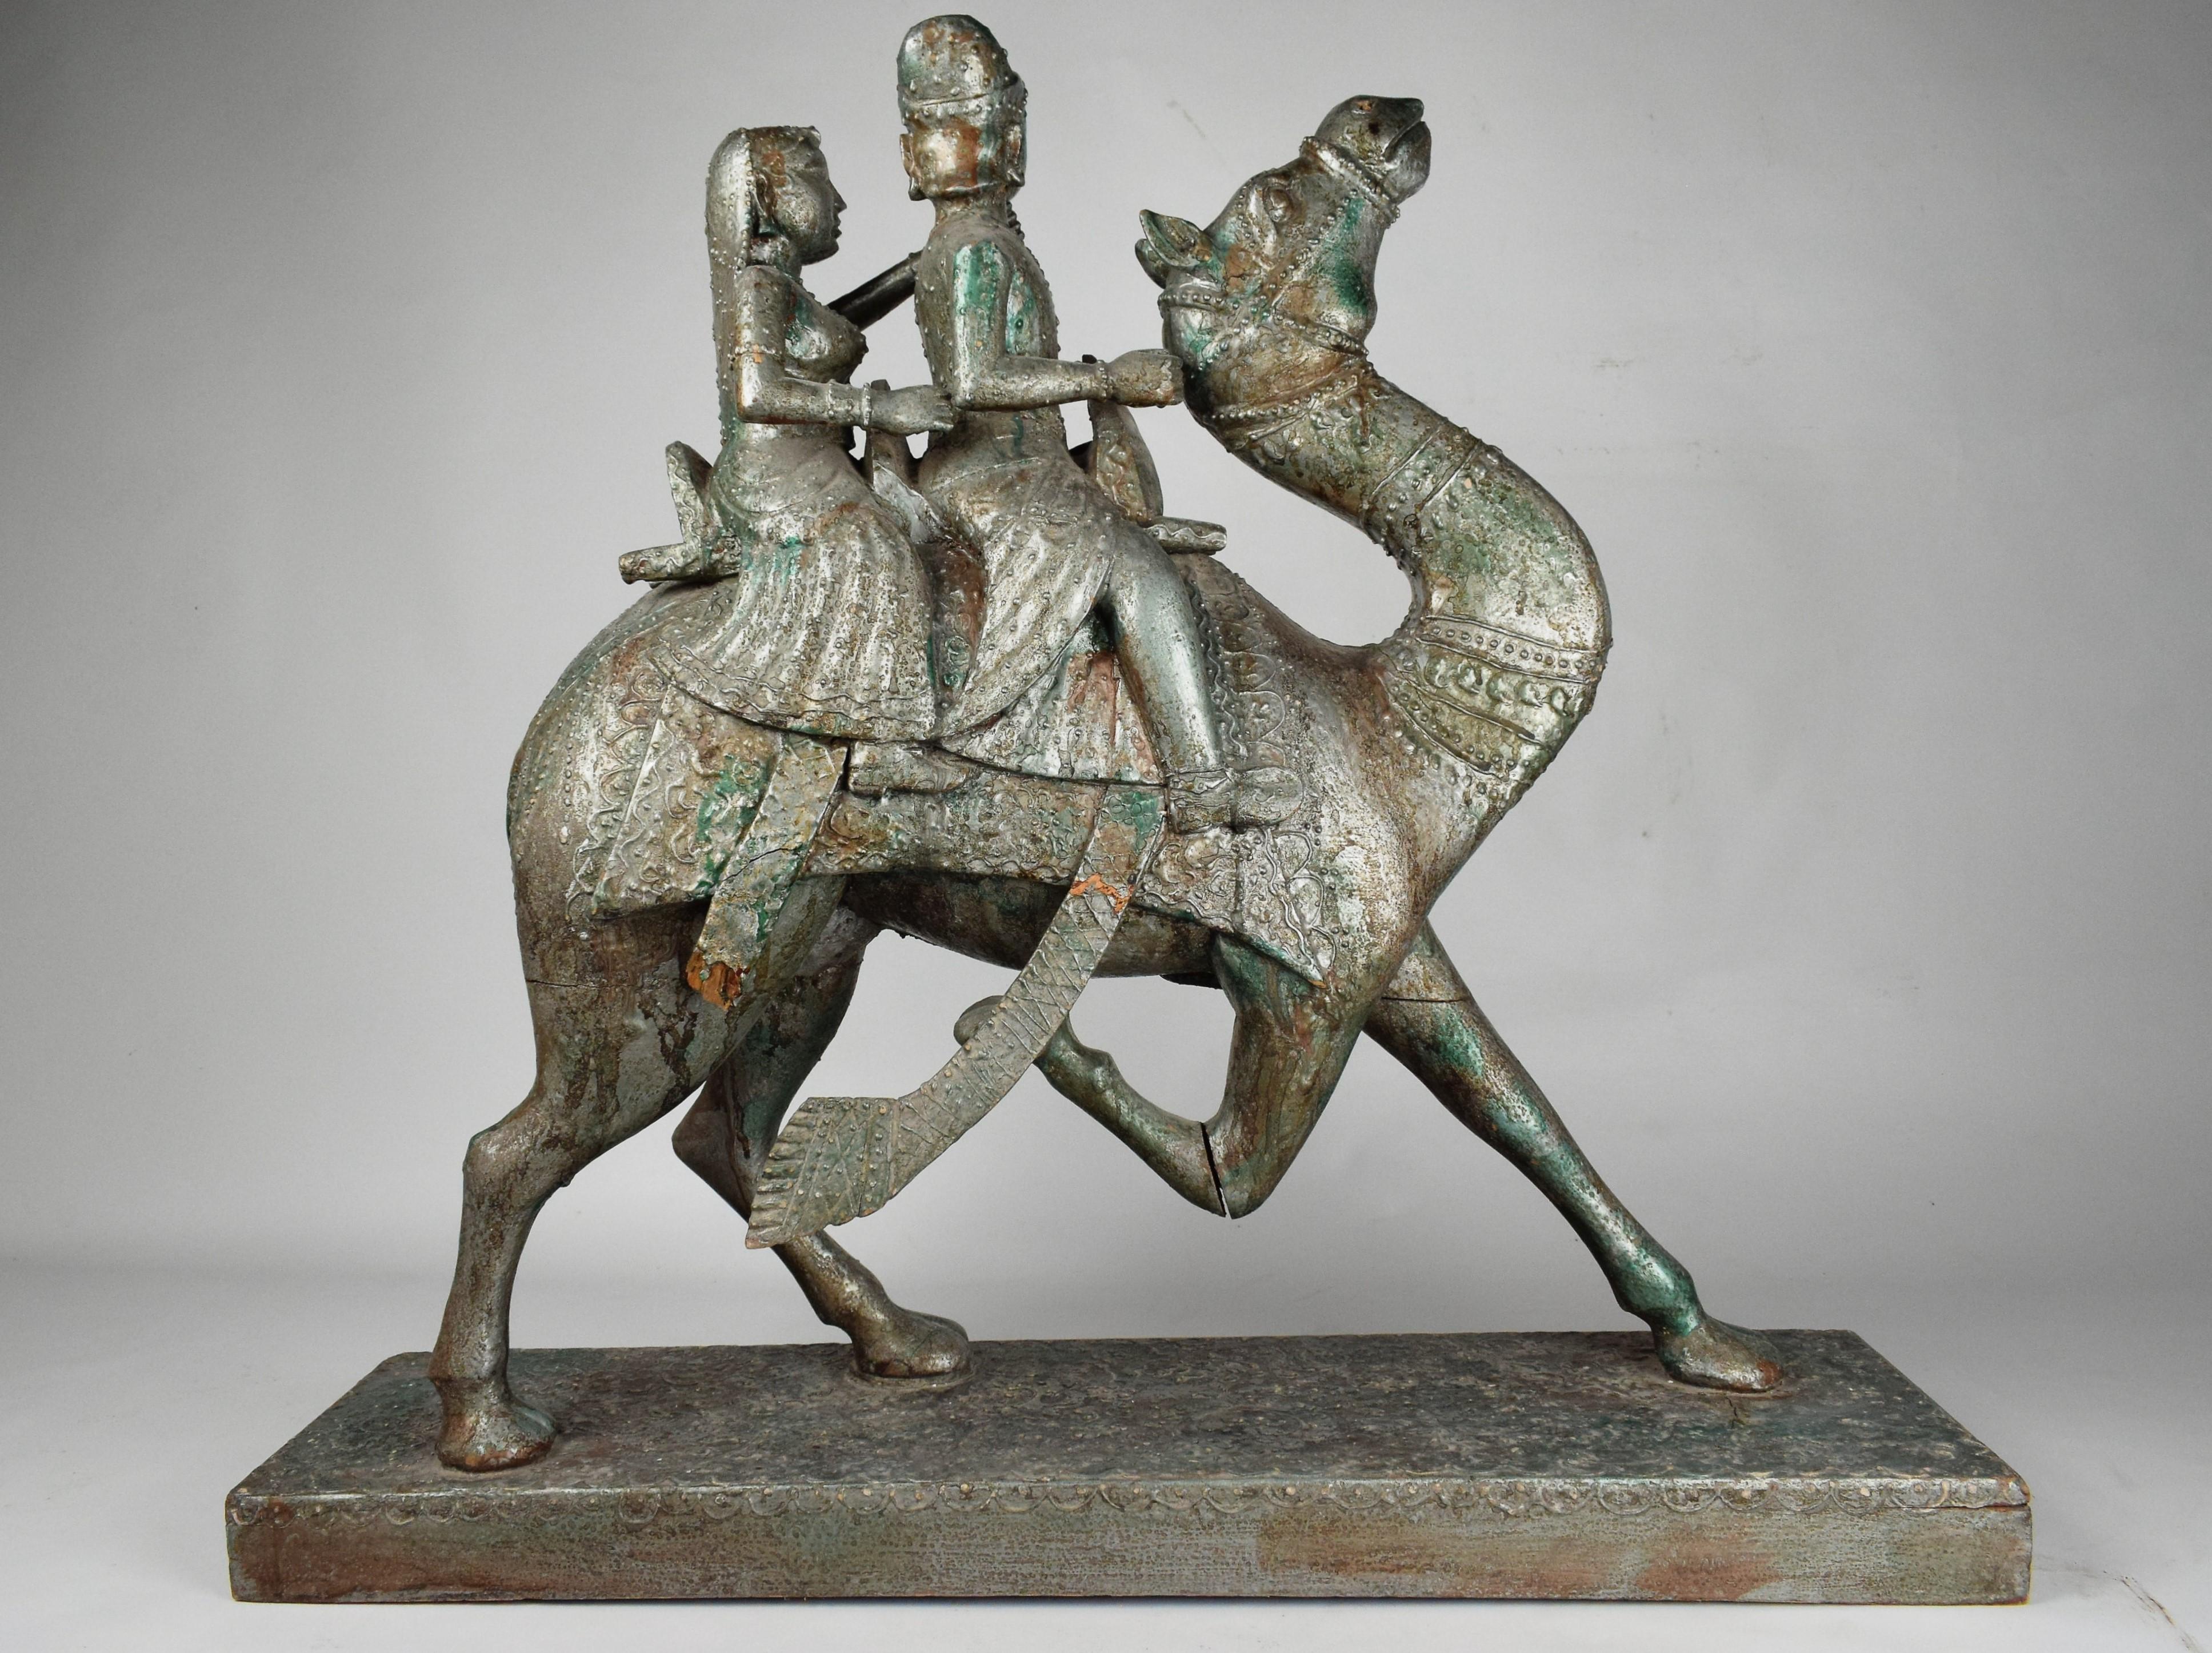 
The beautifully crafted wooden sculpture depicting an Islamic Rajasthani couple riding a majestic camel. The wooden figures are intricately carved with attention to detail, capturing the essence of traditional Rajasthani attire and Islamic cultural